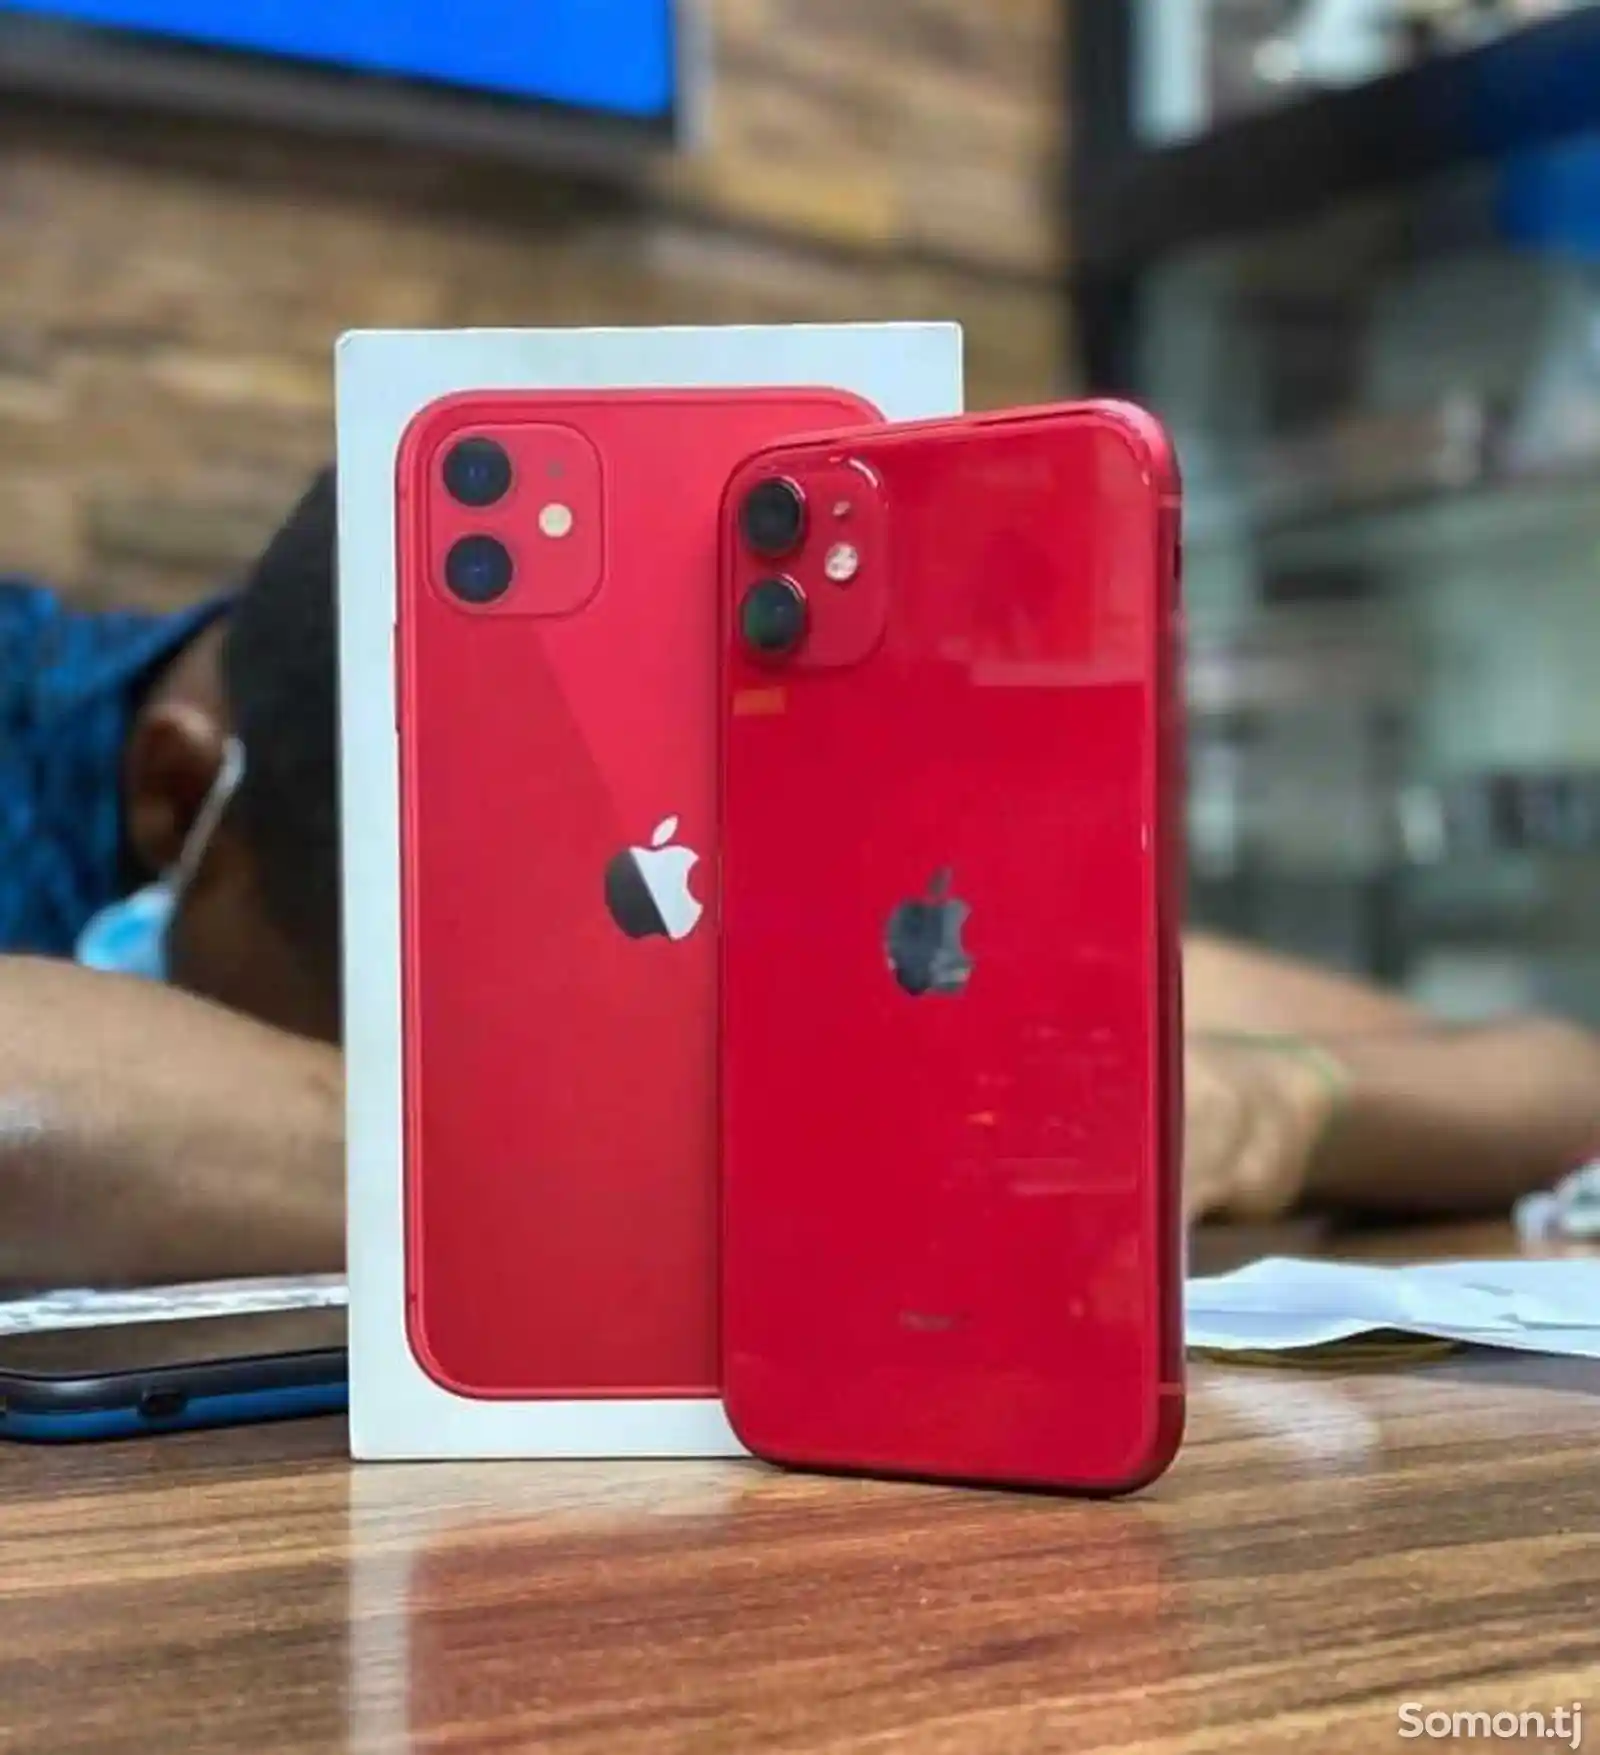 Apple iPhone 11, 256 gb, Product Red-1